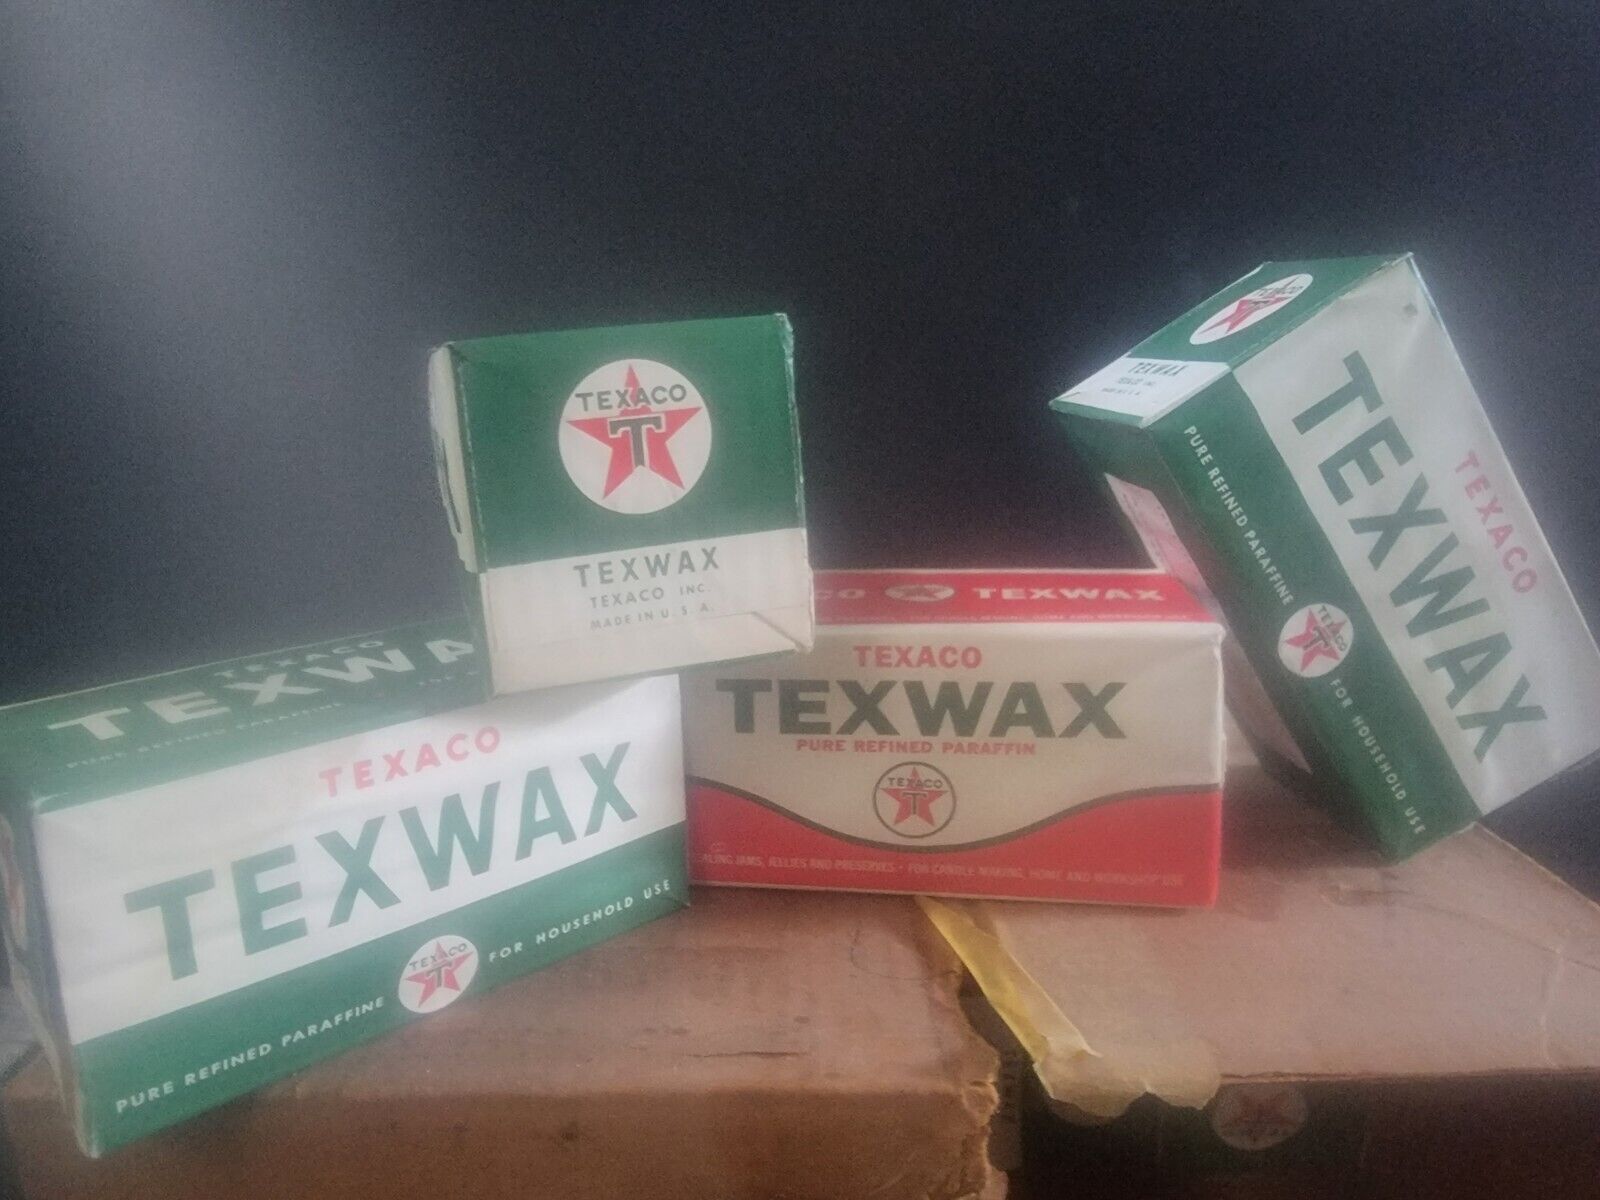 vintage TEXACO one-pound TEXWAX Pure Refined Paraffin wax package, 1964